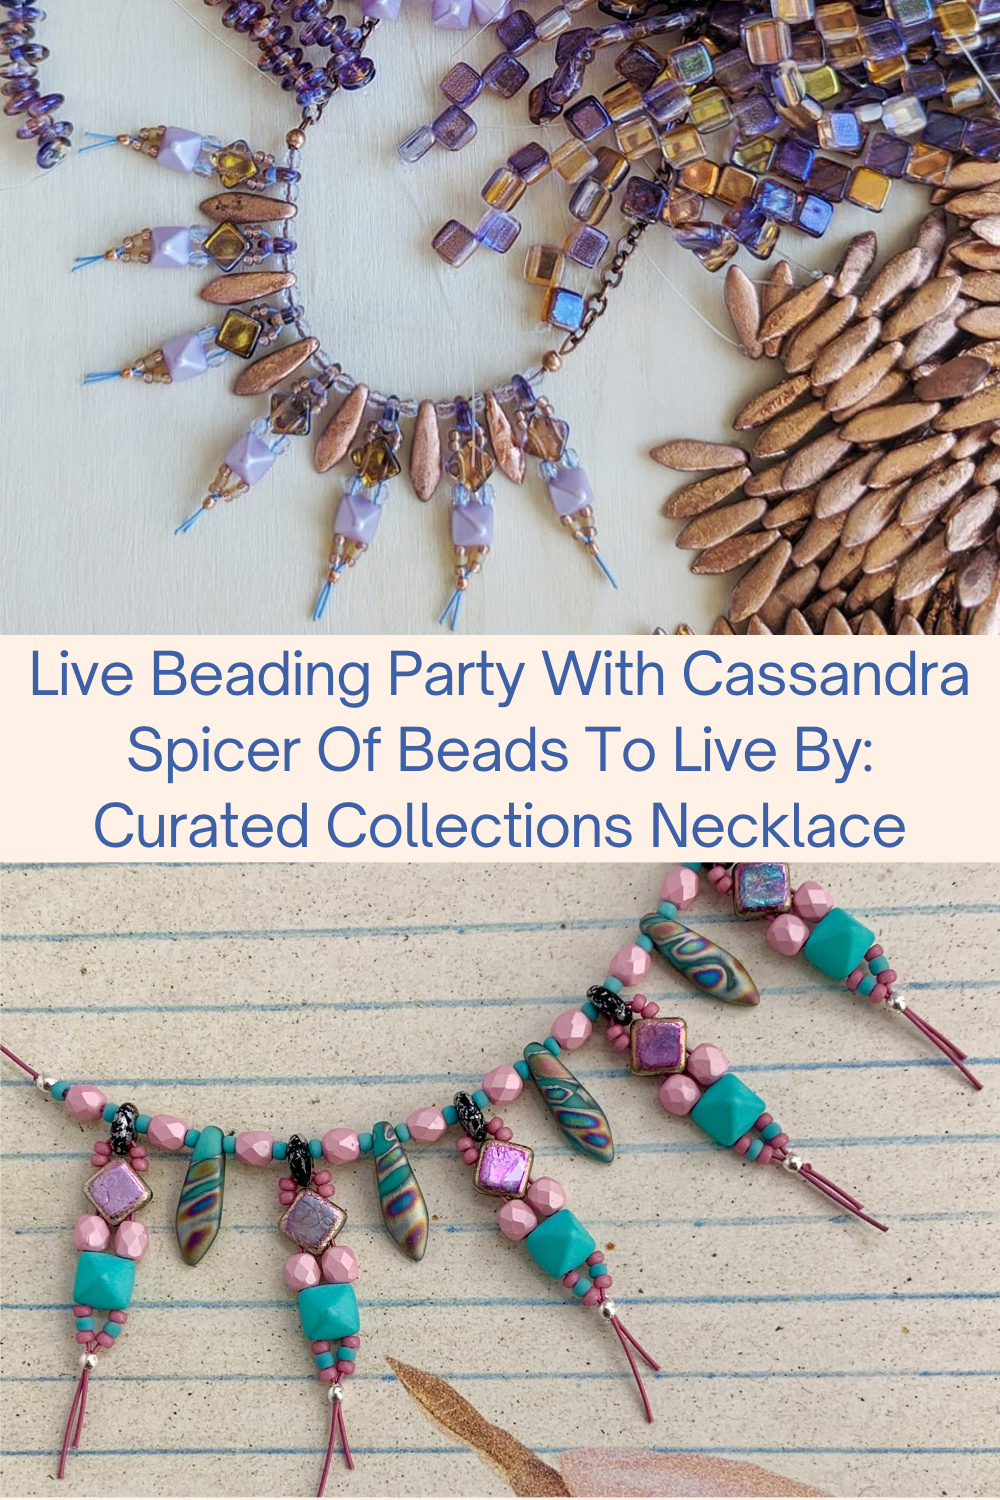 Live Beading Party With Cassandra Spicer Of Beads To Live By_Curated Collections Necklace Collage